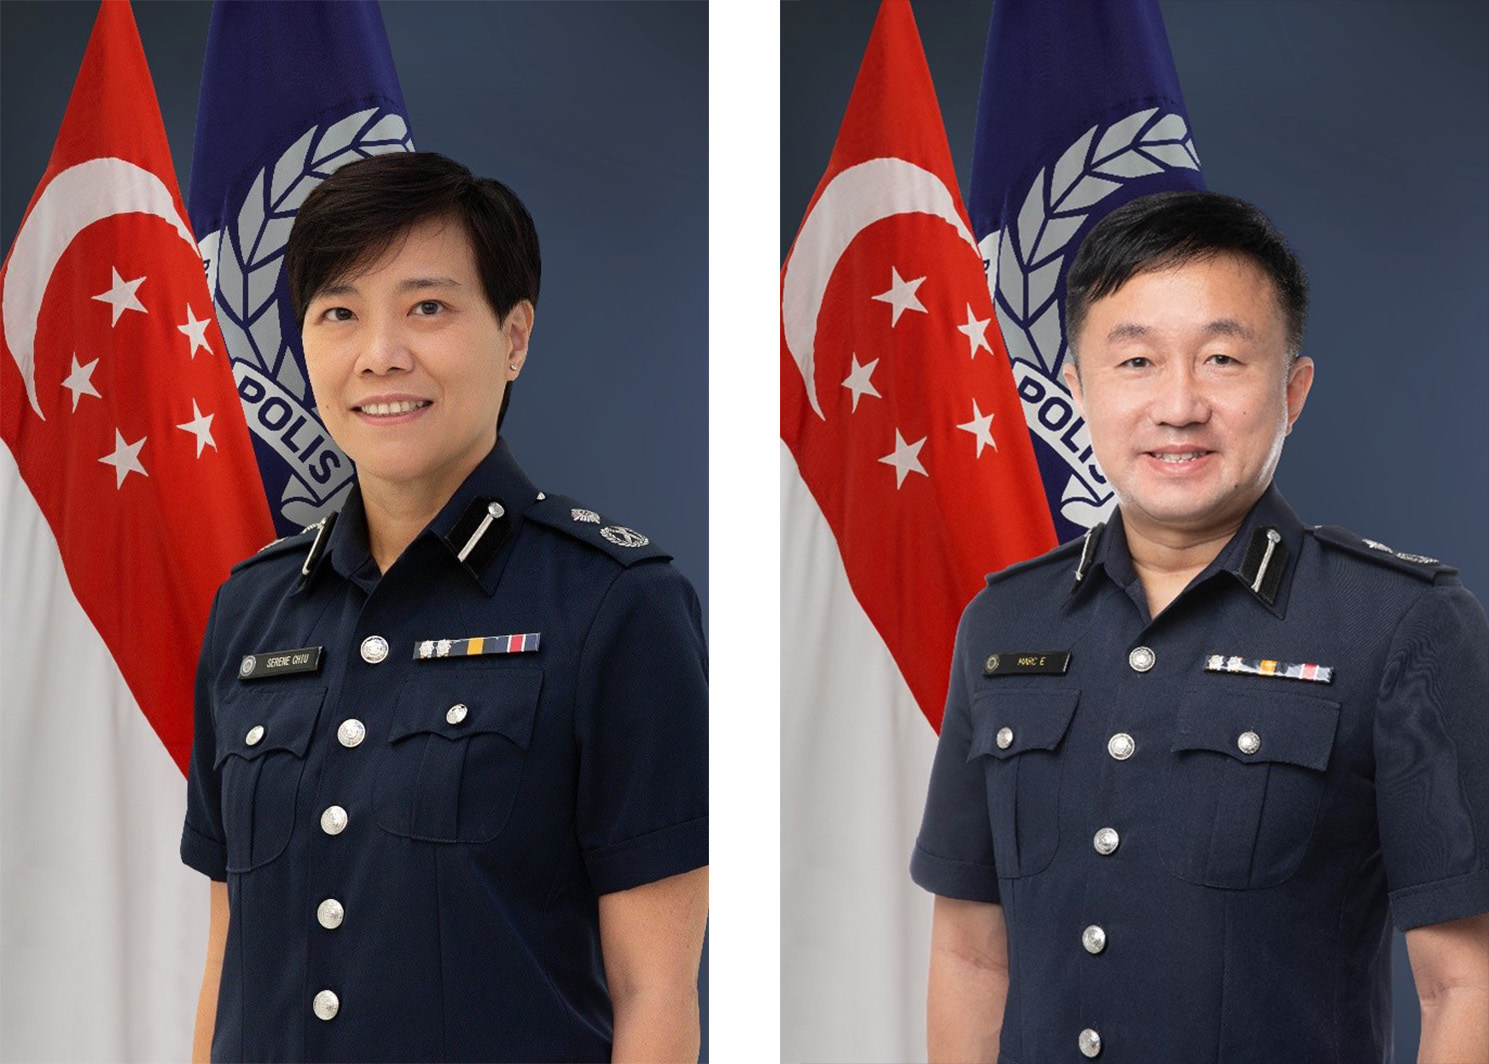 20220830_change_of_command_at_clementi_police_division_1